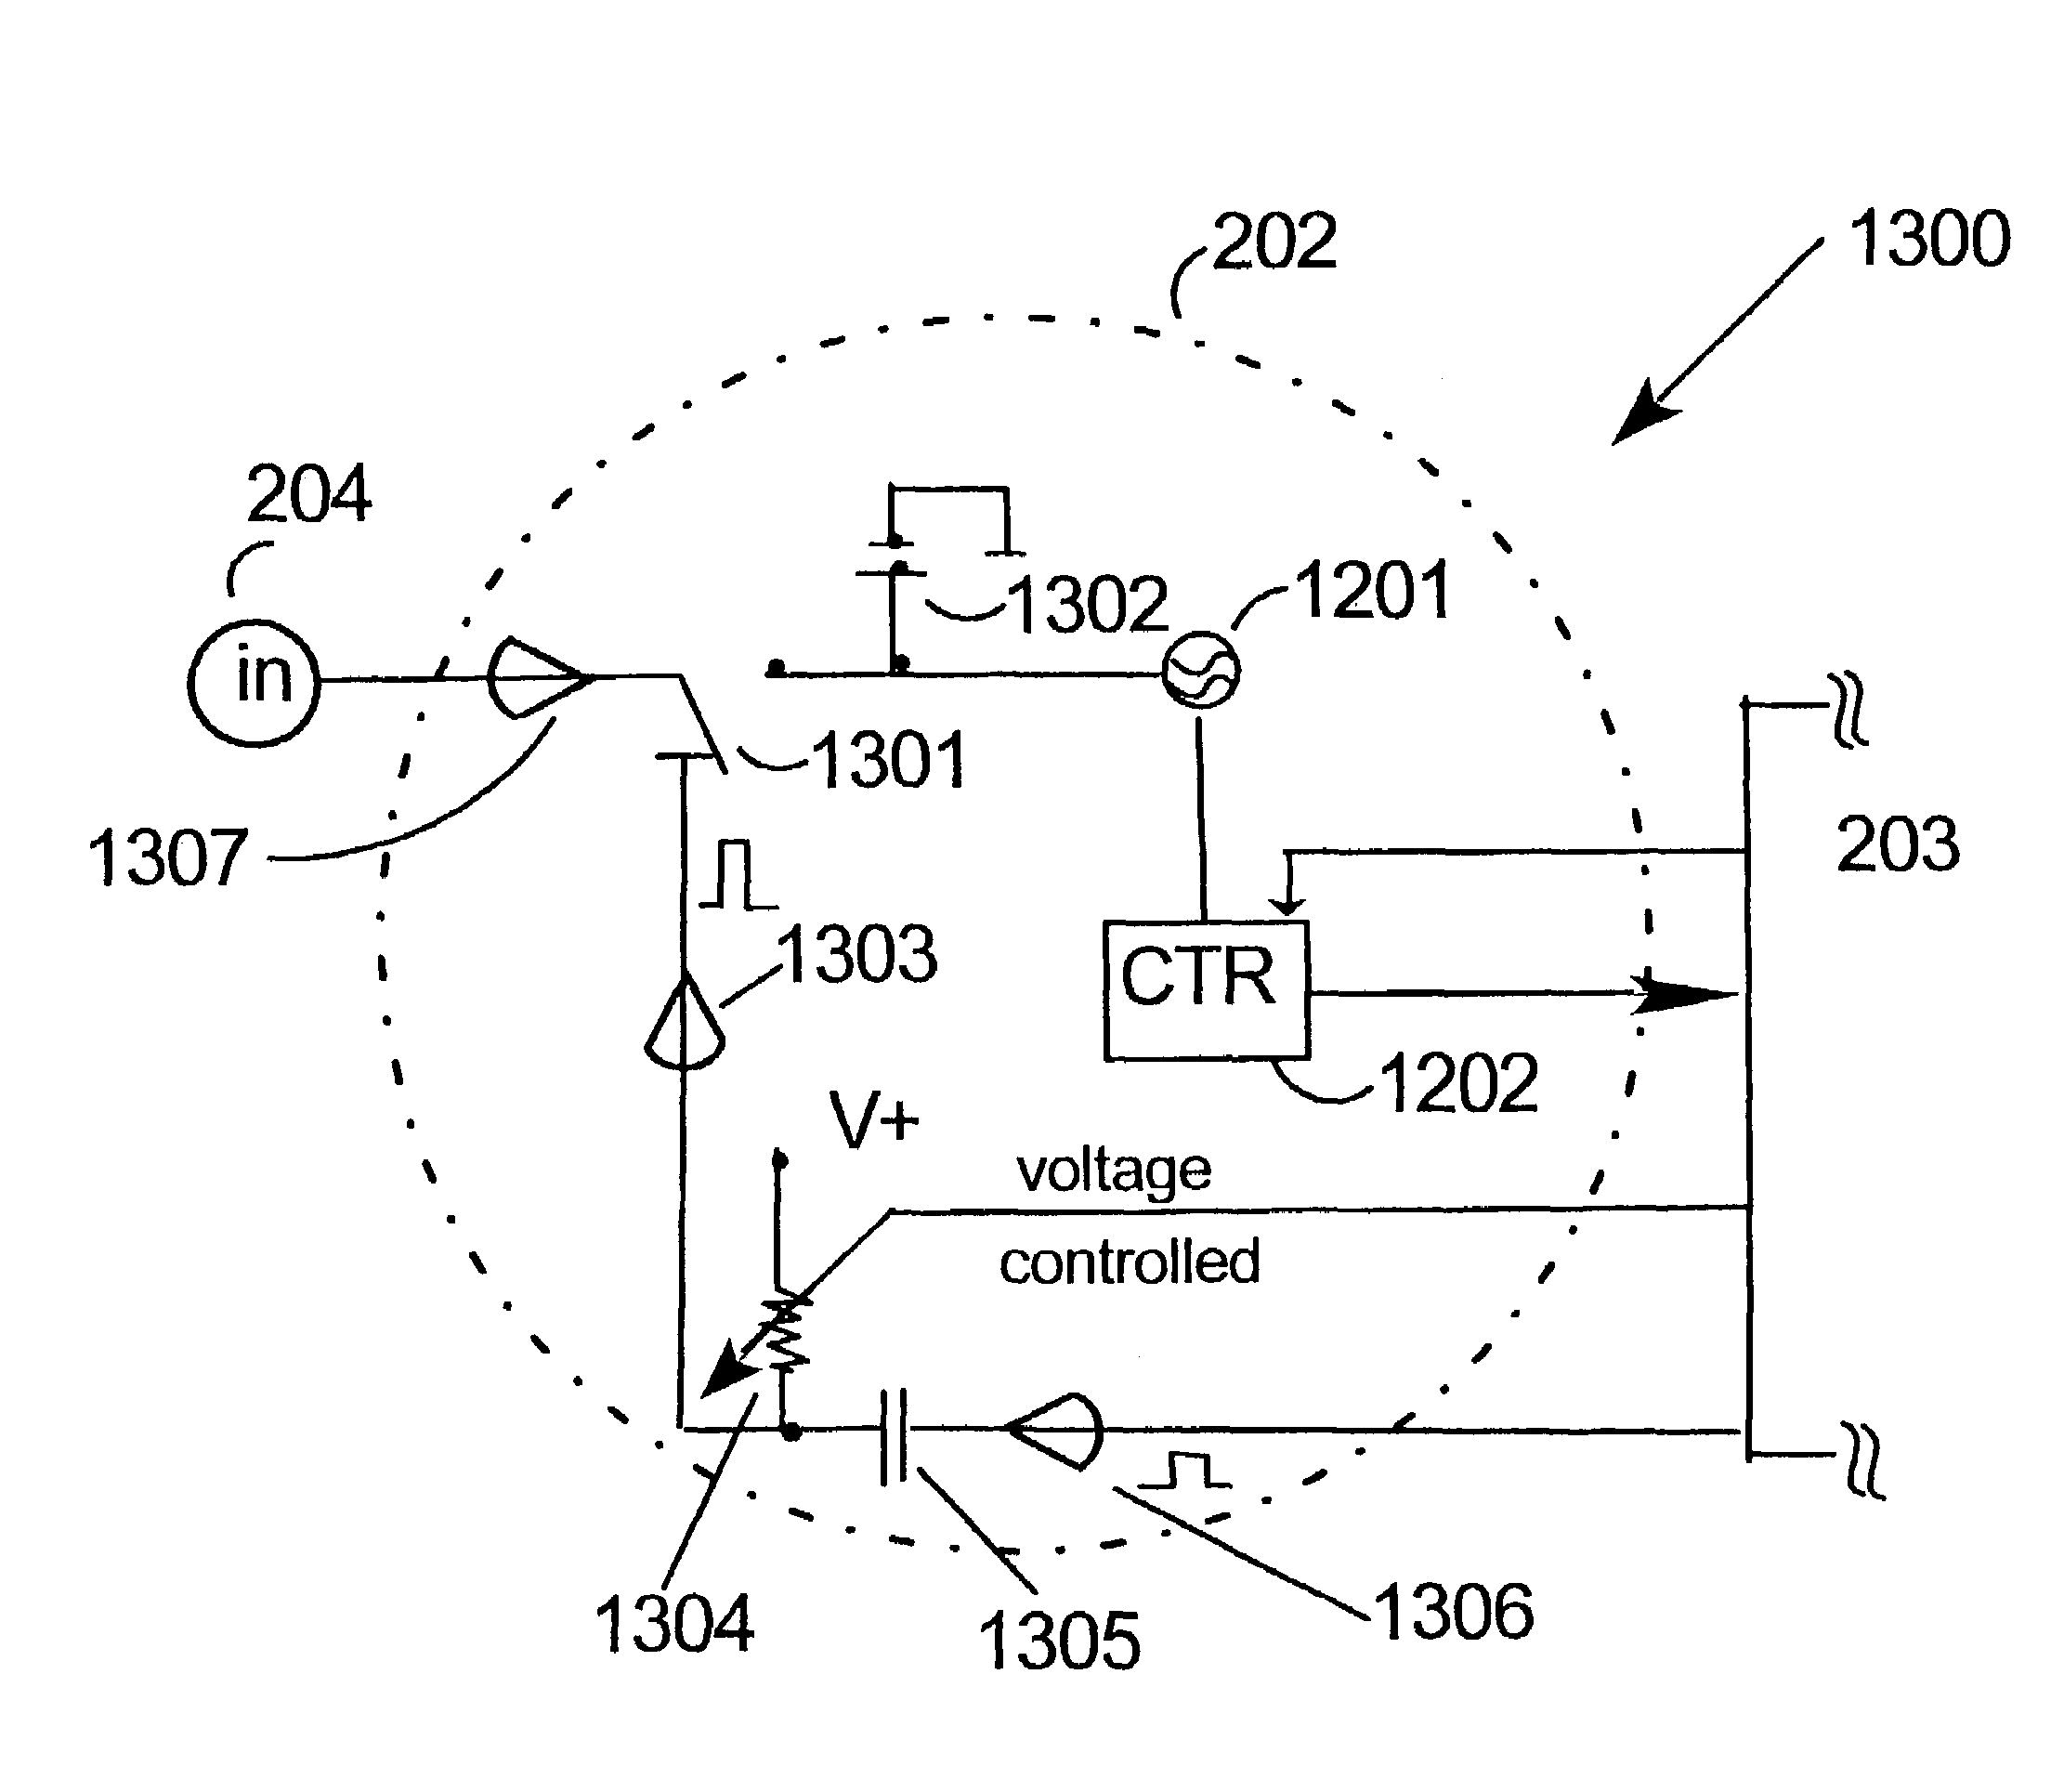 Variable sized aperture window of an analog-to-digital converter